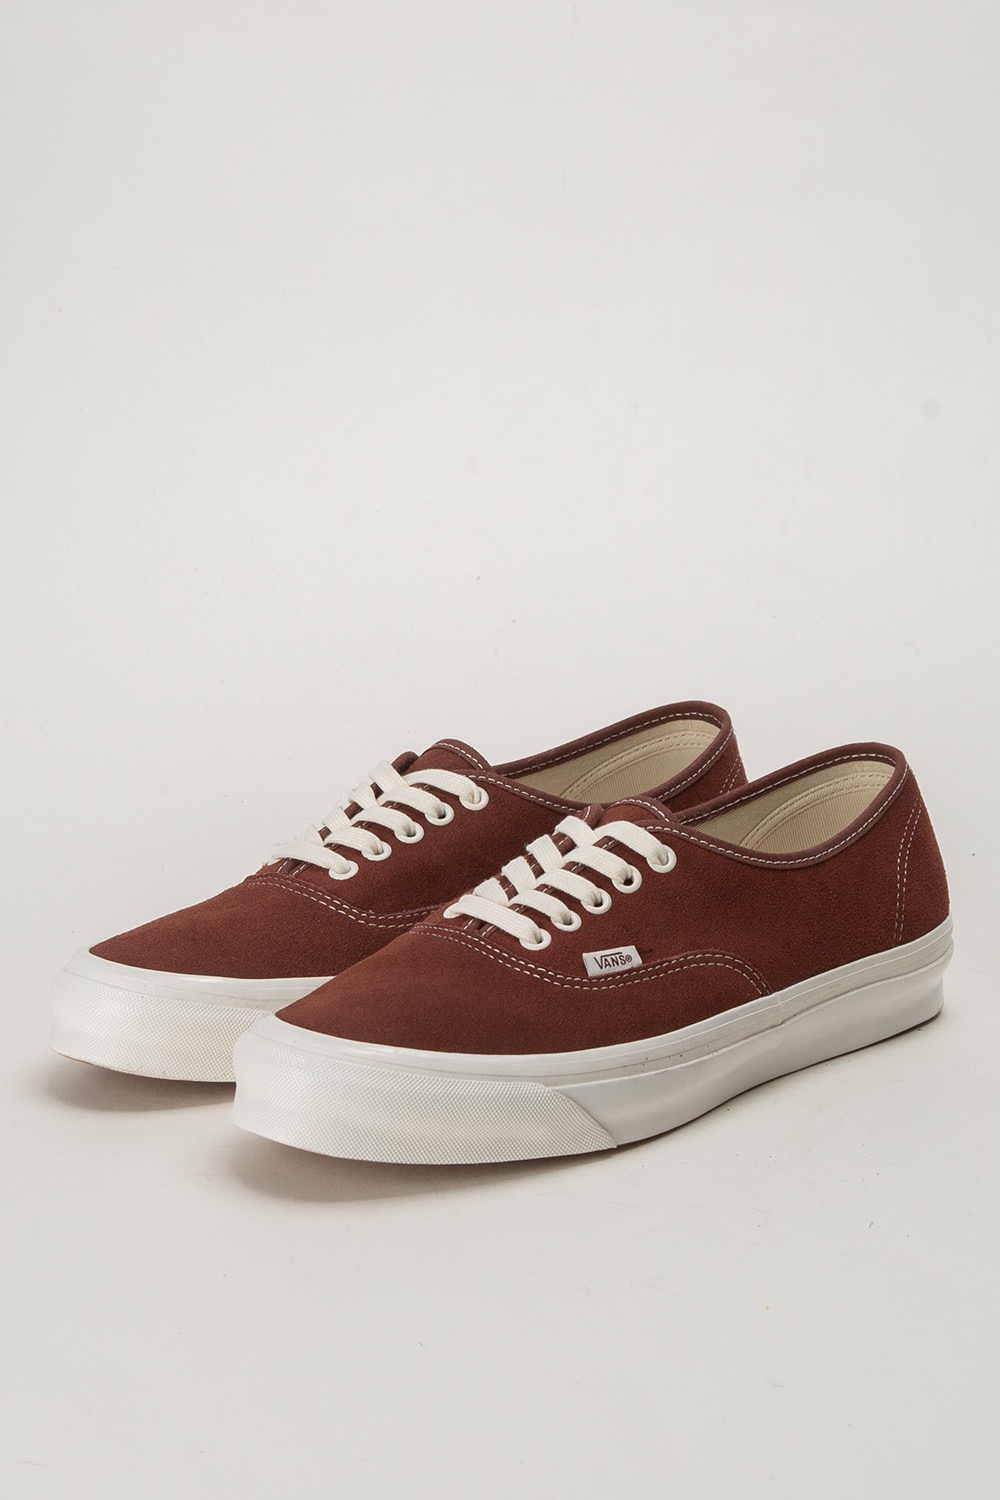 OG AUTHENTIC LX SUEDE BROWN